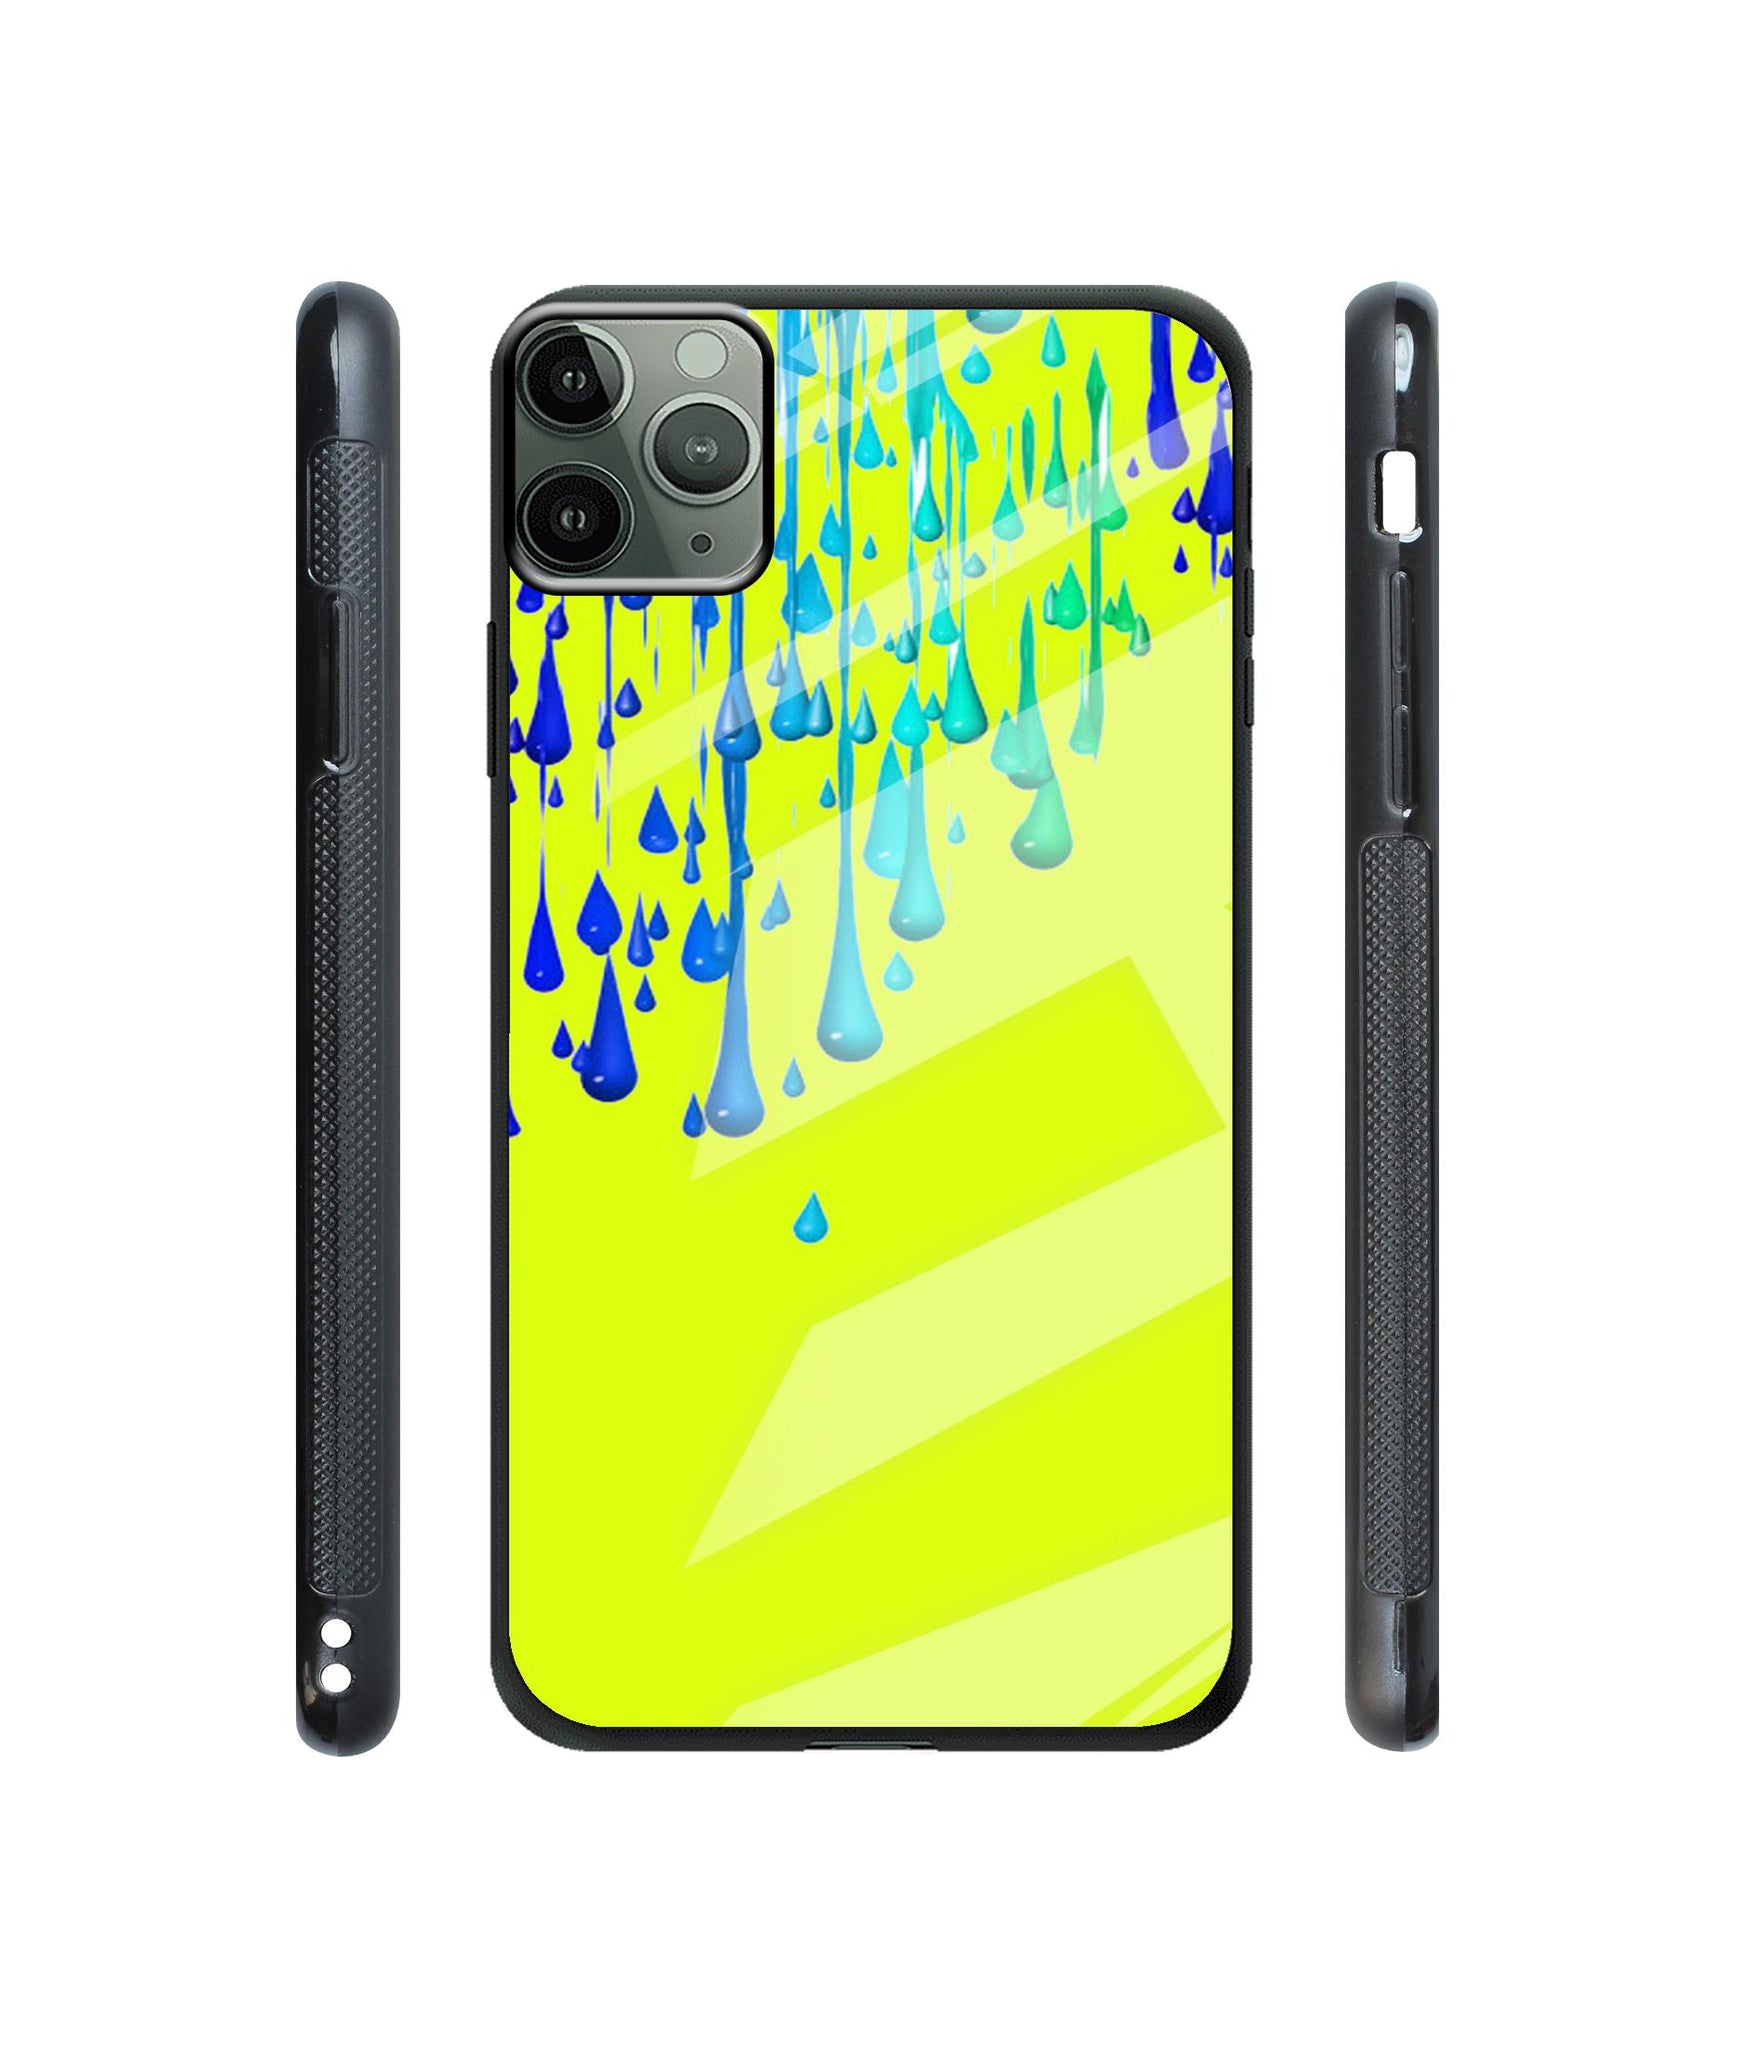 Neon Paint Designer Printed Glass Cover for Apple iPhone 11 Pro